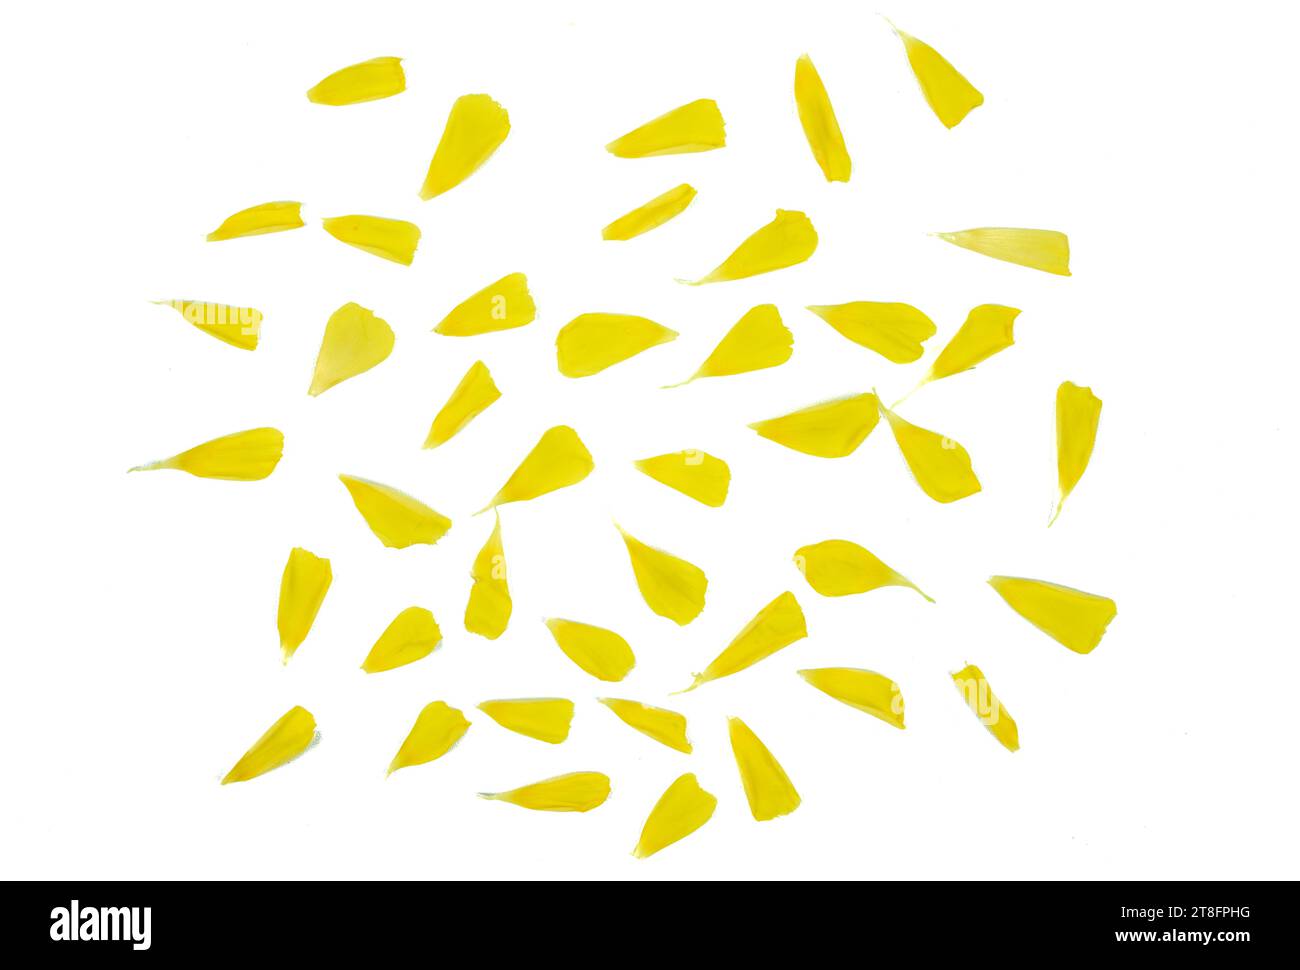 Damiana or Turnera diffusa flower petals on a white background Stock Photo